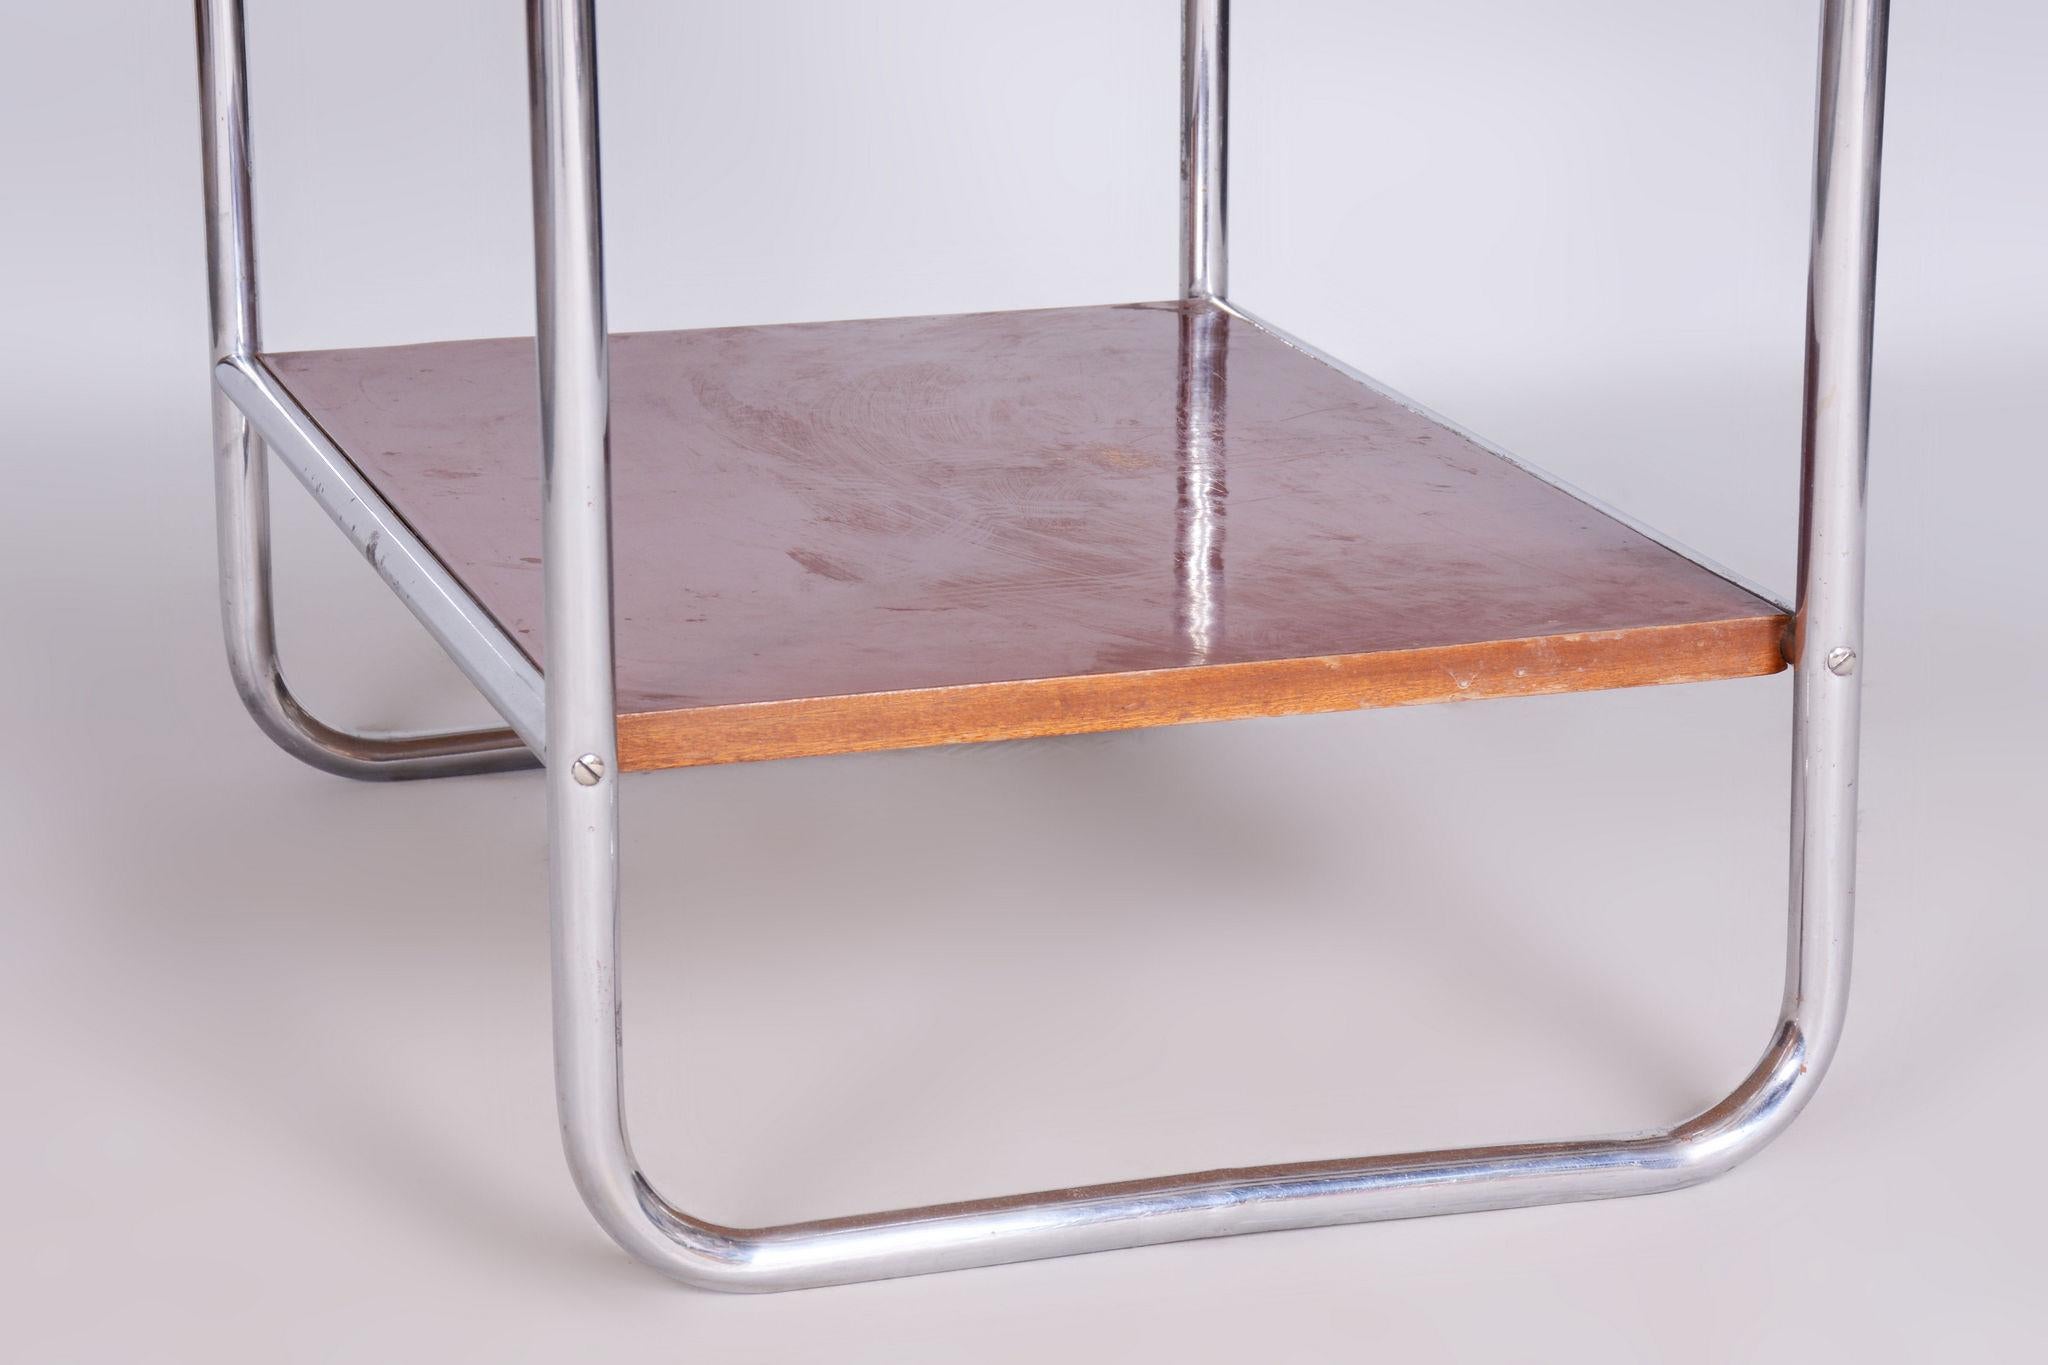 Original Bauhaus Side Table.

Source: Czechia (Czechoslovakia)
Period: 1930-1939
Material: Chrome-Plated Steel

The chrome parts have been professionally cleaned. 

This item features classic Bauhaus design elements. Elements of this style are